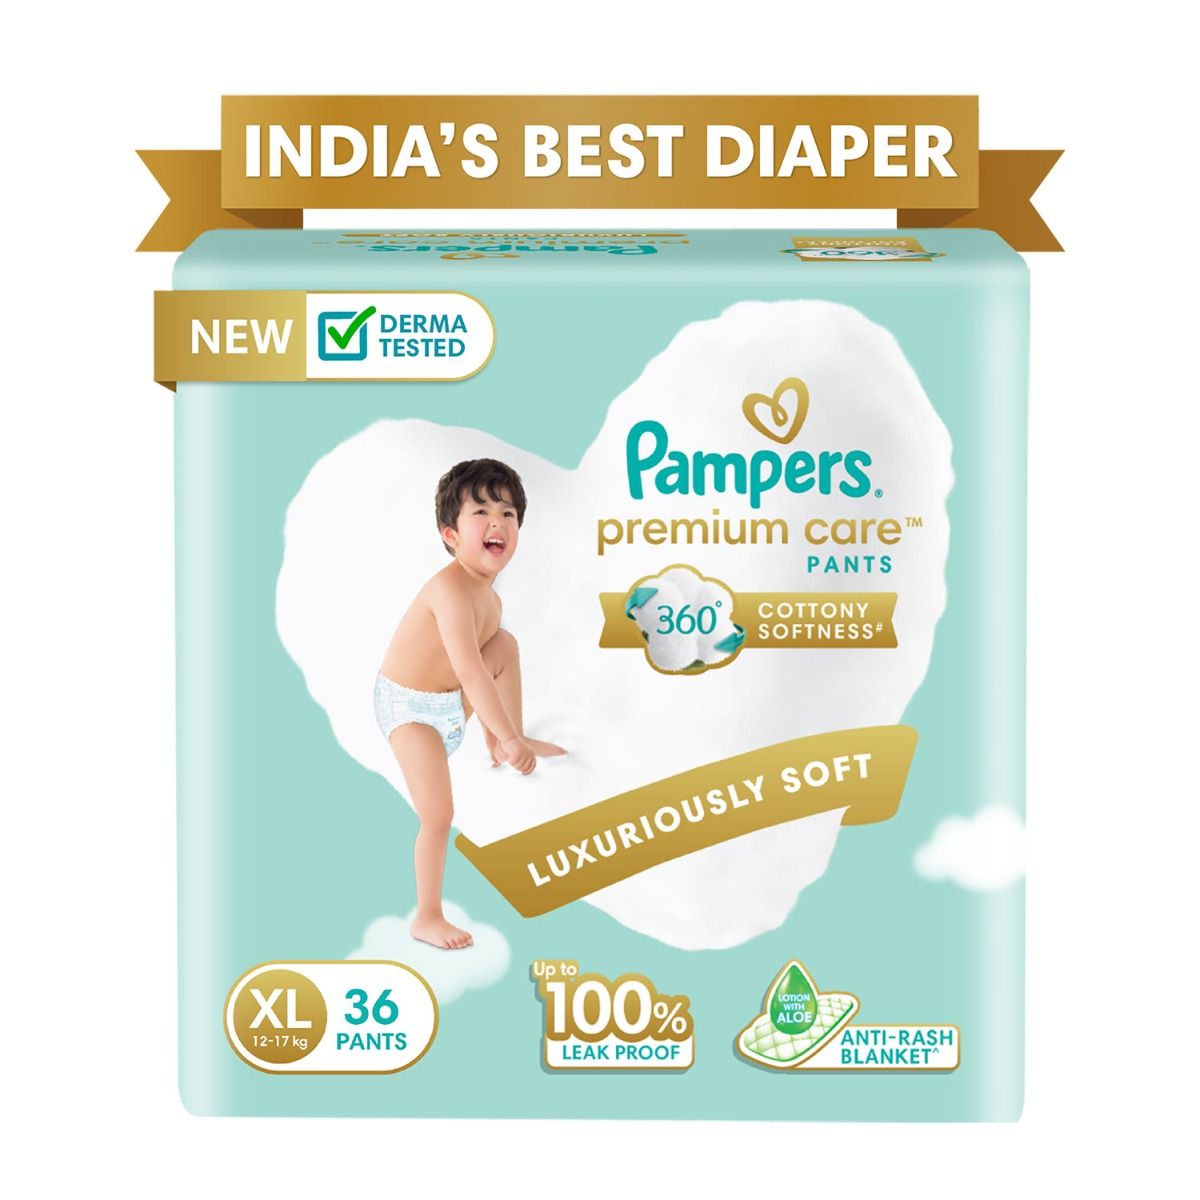 Pampers Premium Care Diaper Pants XL, 36 Count Price, Uses, Side Effects,  Composition - Apollo Pharmacy